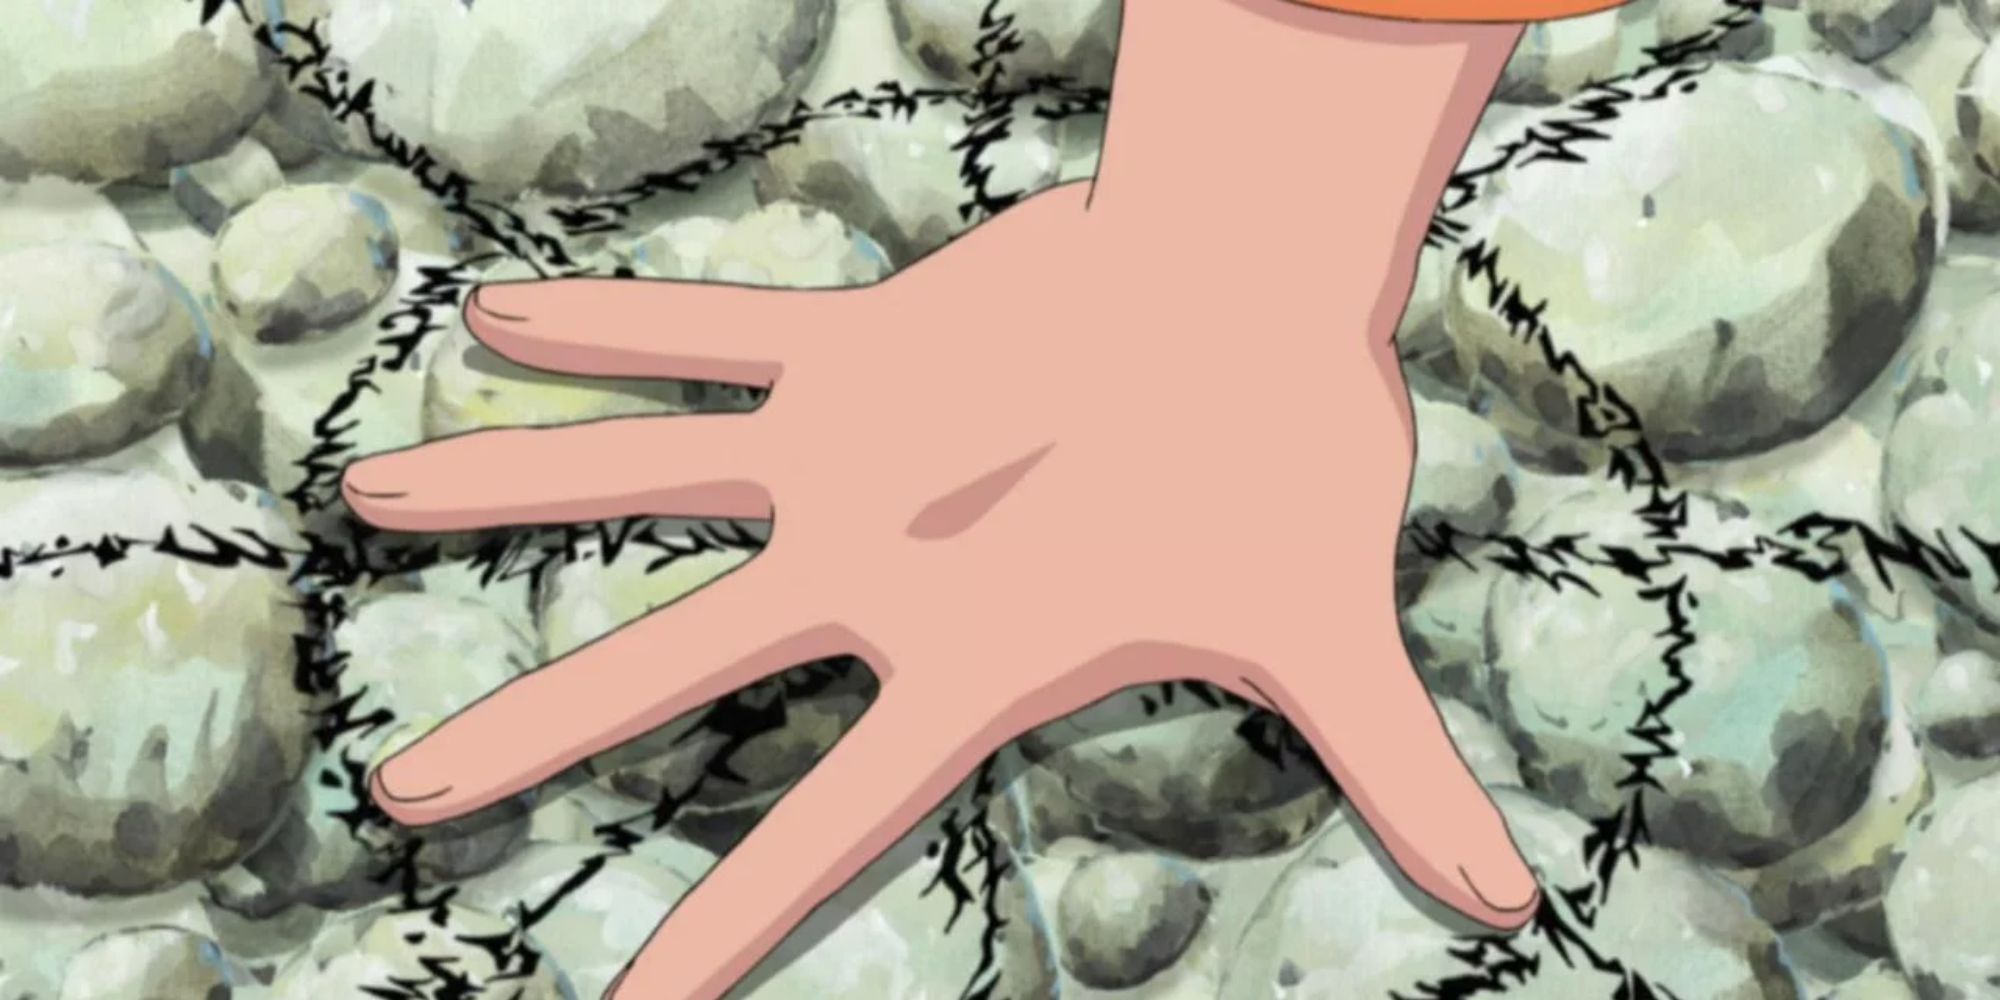 The Ultimate Guide To Mastering Naruto S Most Intricate Jutsu Hand Signs